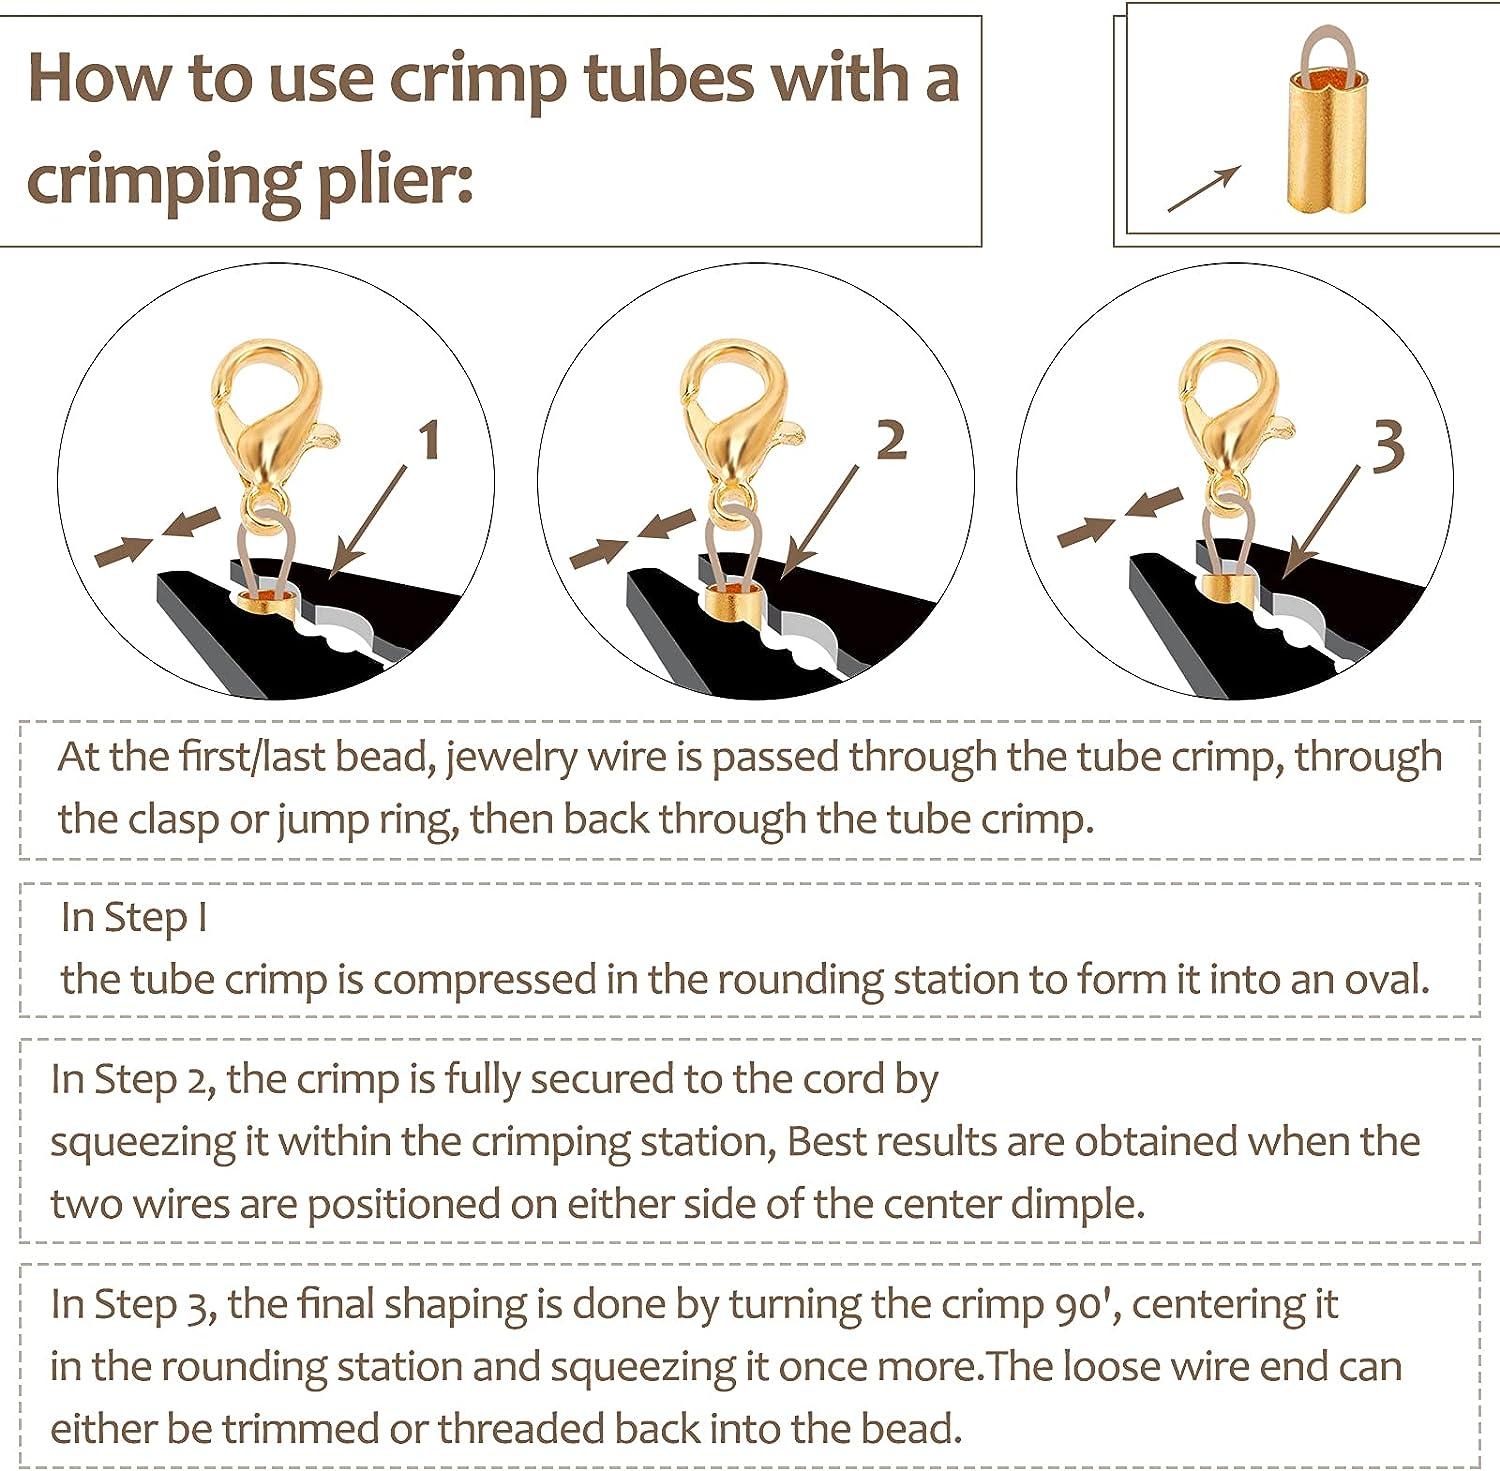 How to Use Crimp Beads & Tubes 